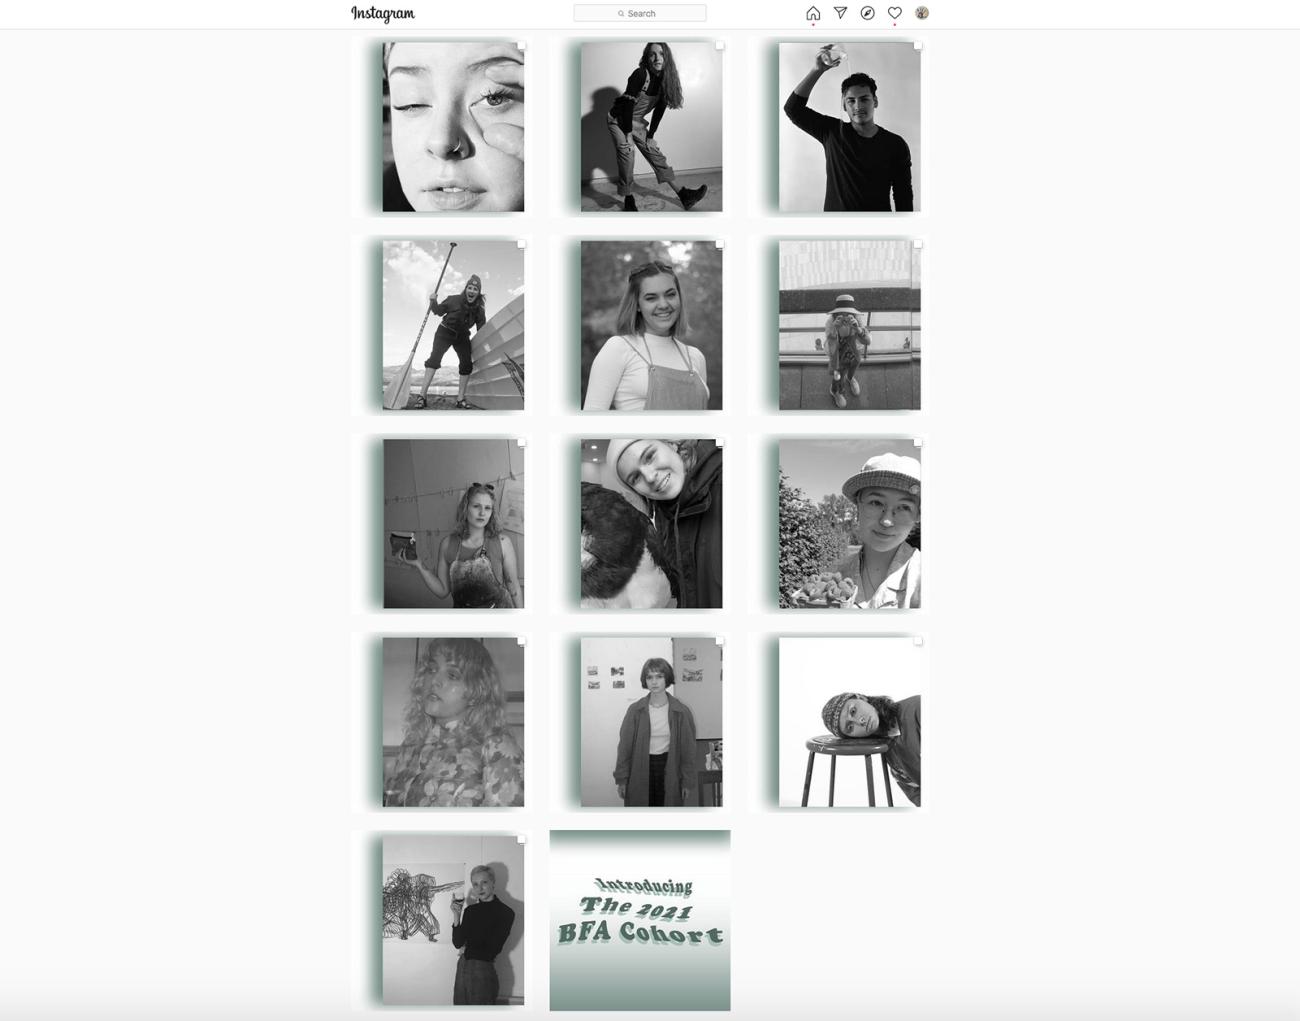 tiled images from Instagram, each showing a member of the class